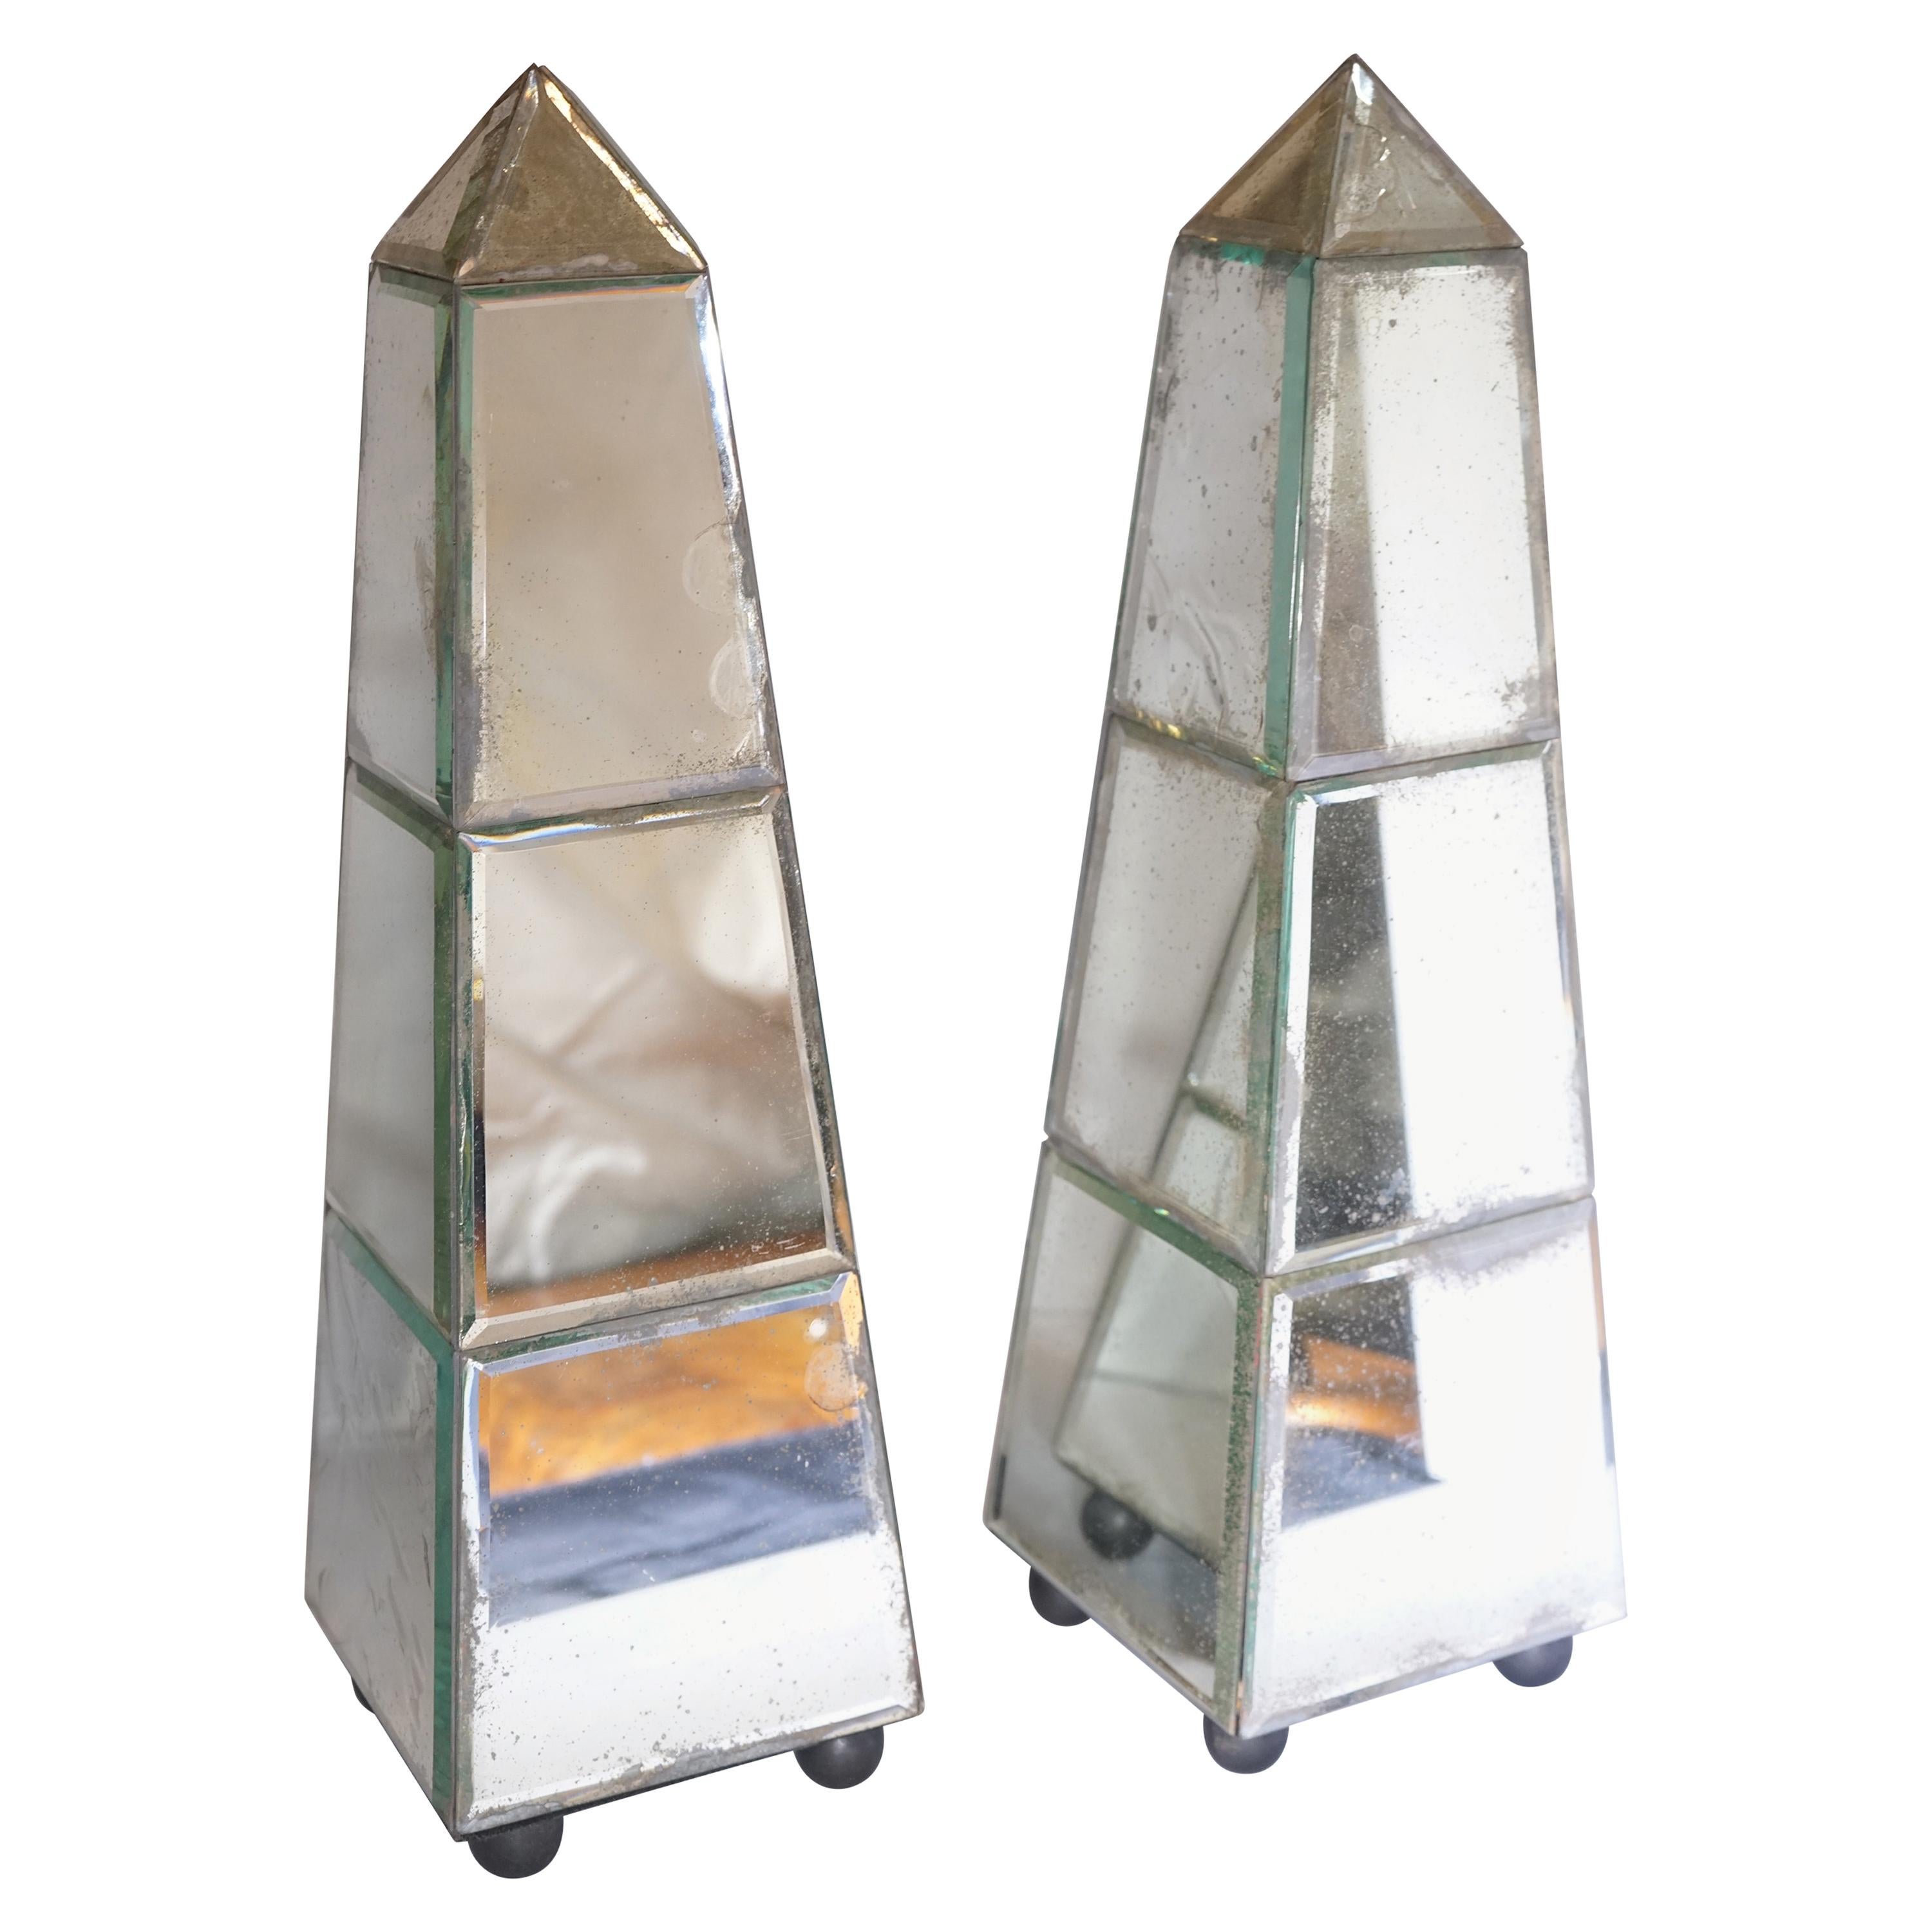 1940s French Pair of Mirrored Obelisk Objet Sculptures